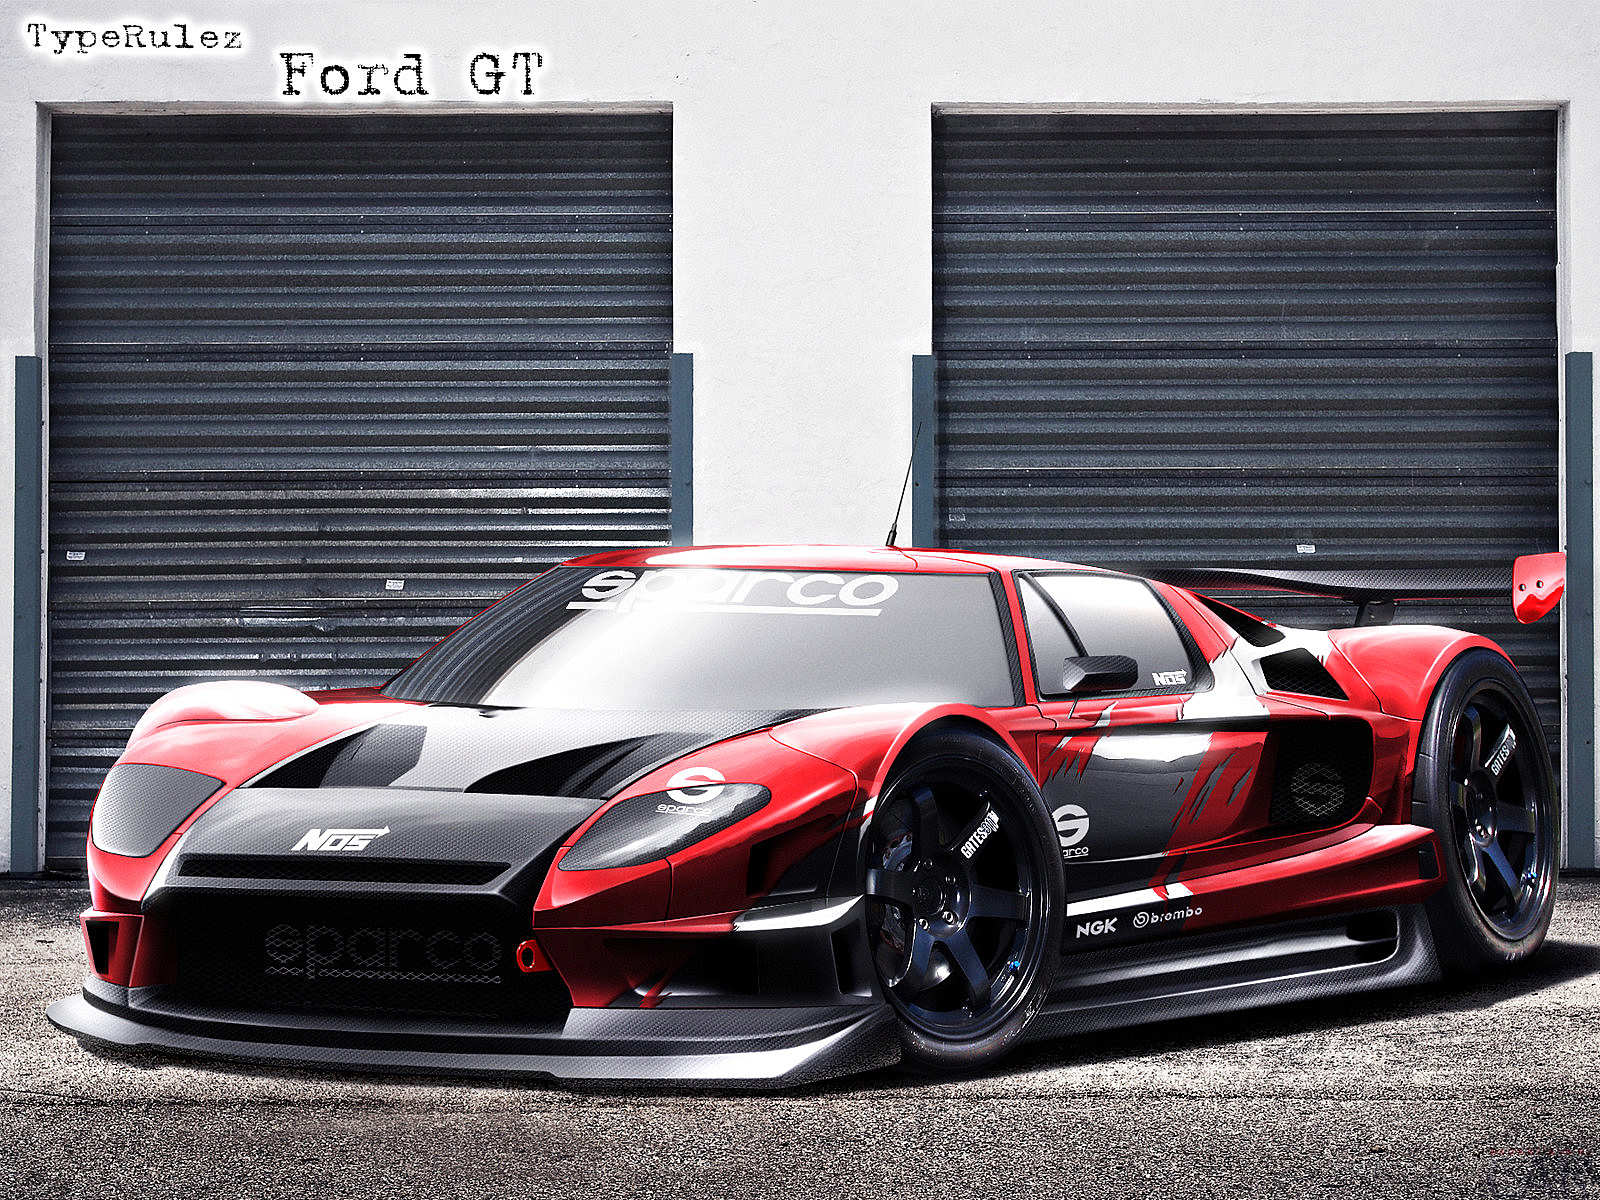 Awesome Ford Gt Widescreen Backgrounds For Mobile Phone Car Ford Gt